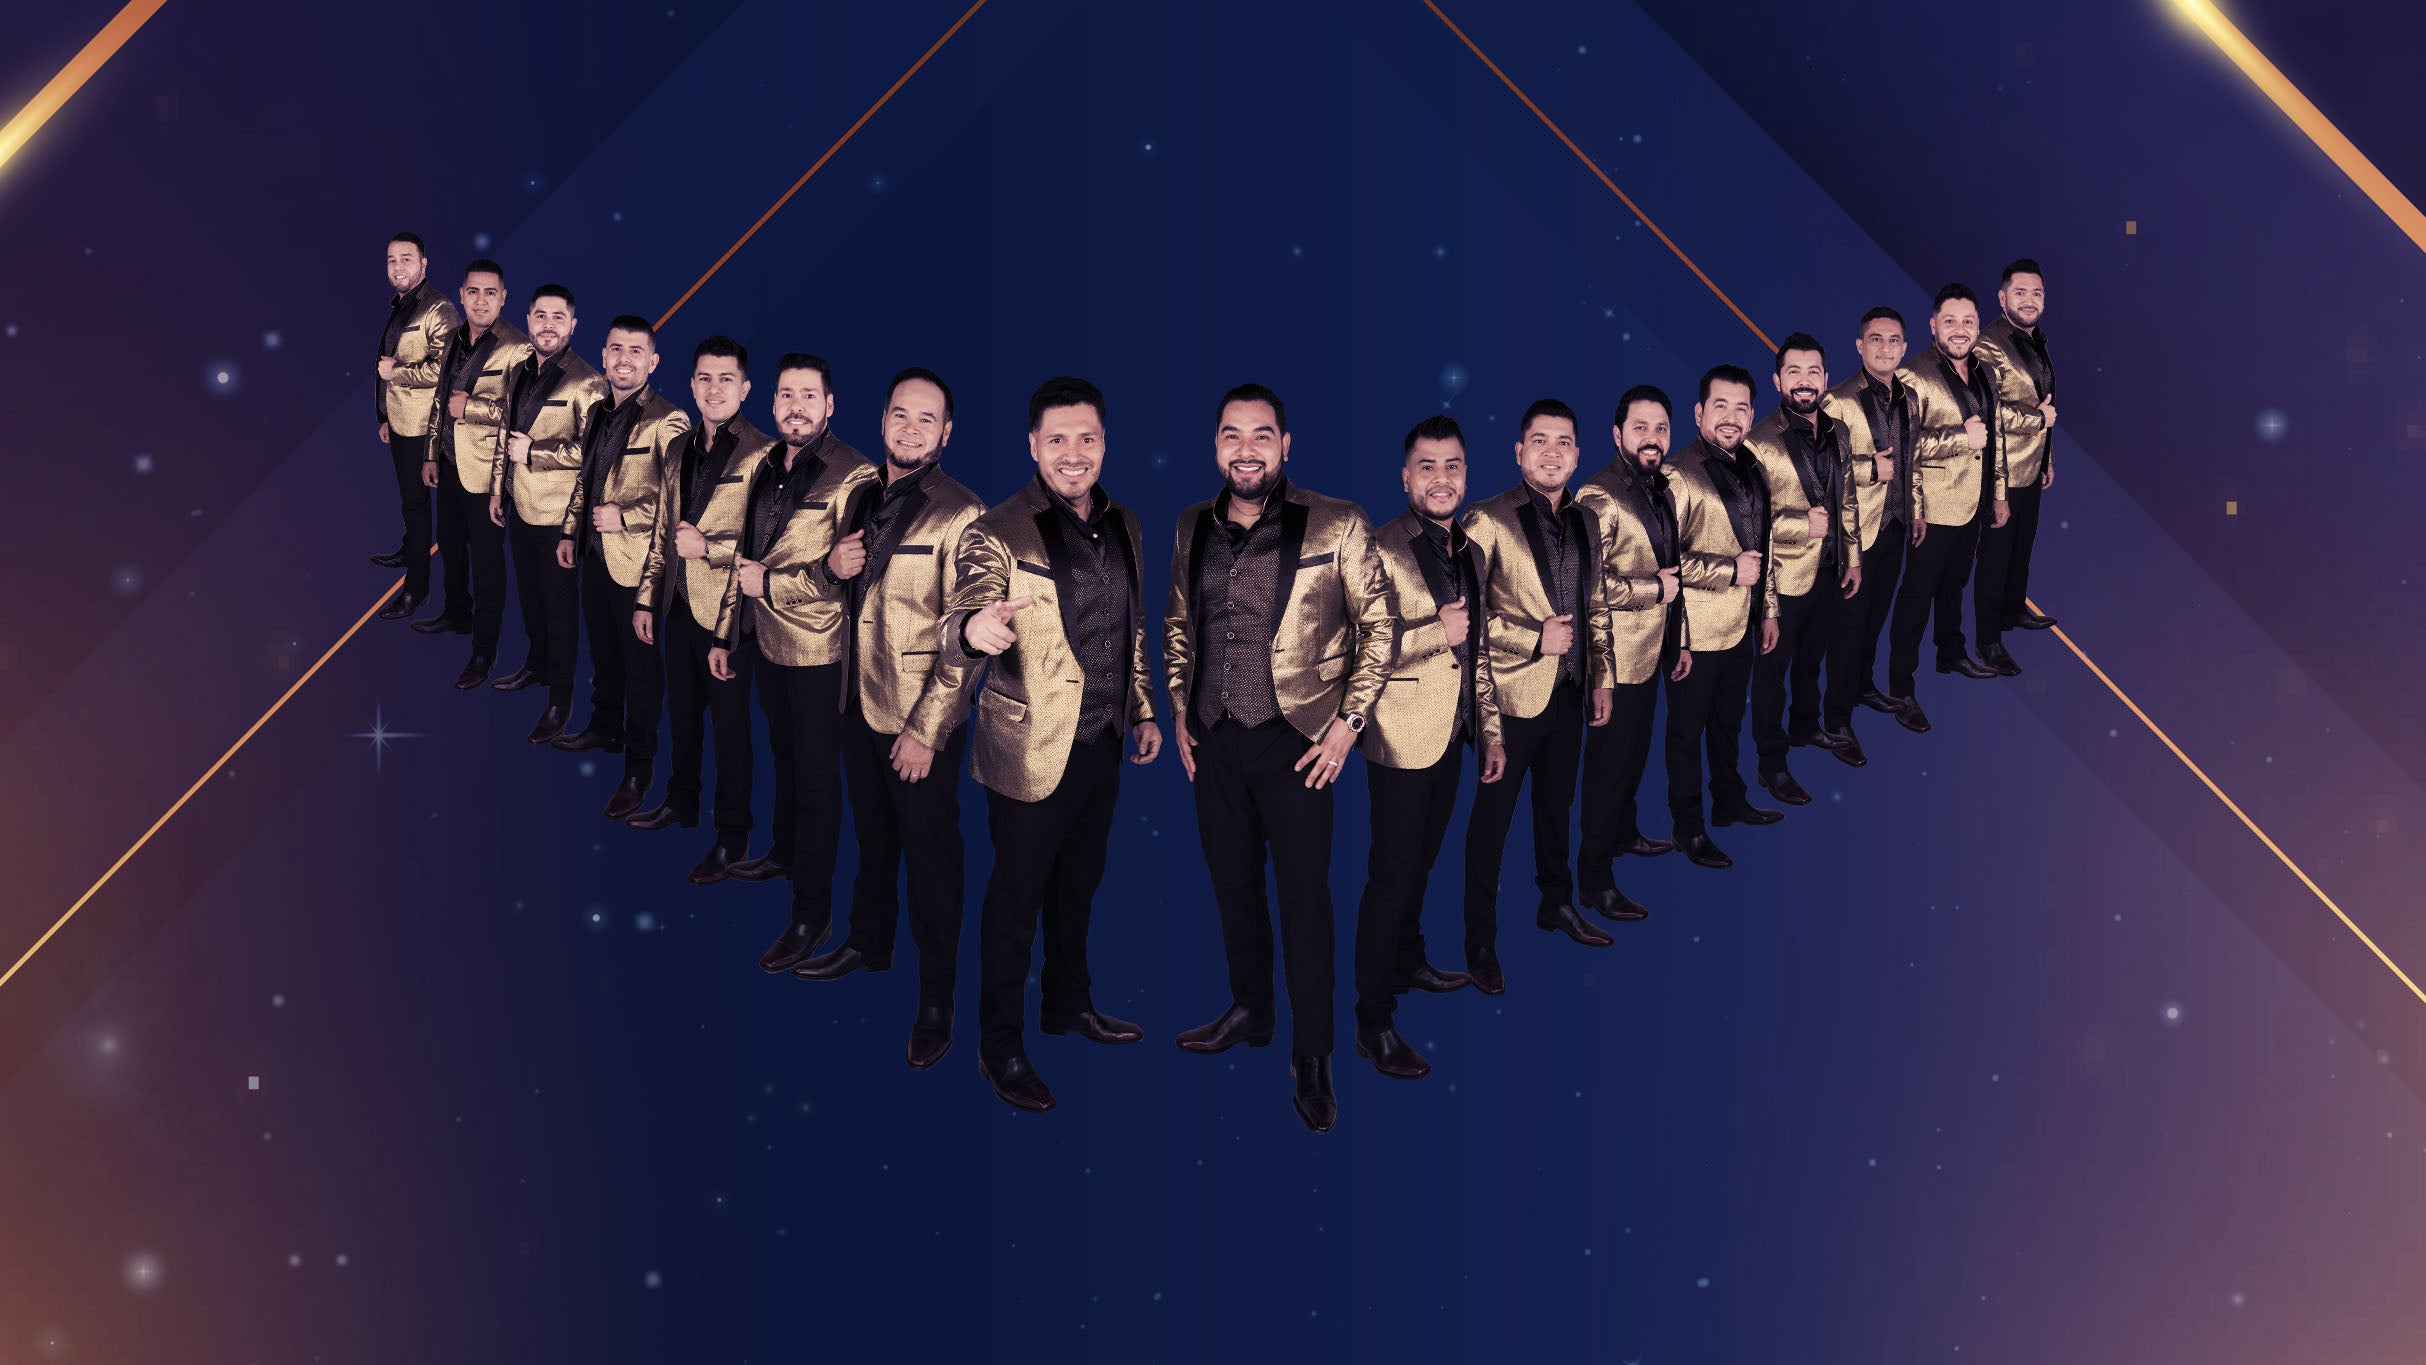 new presale passcode for Banda MS advanced tickets in Oakland at Oakland Arena